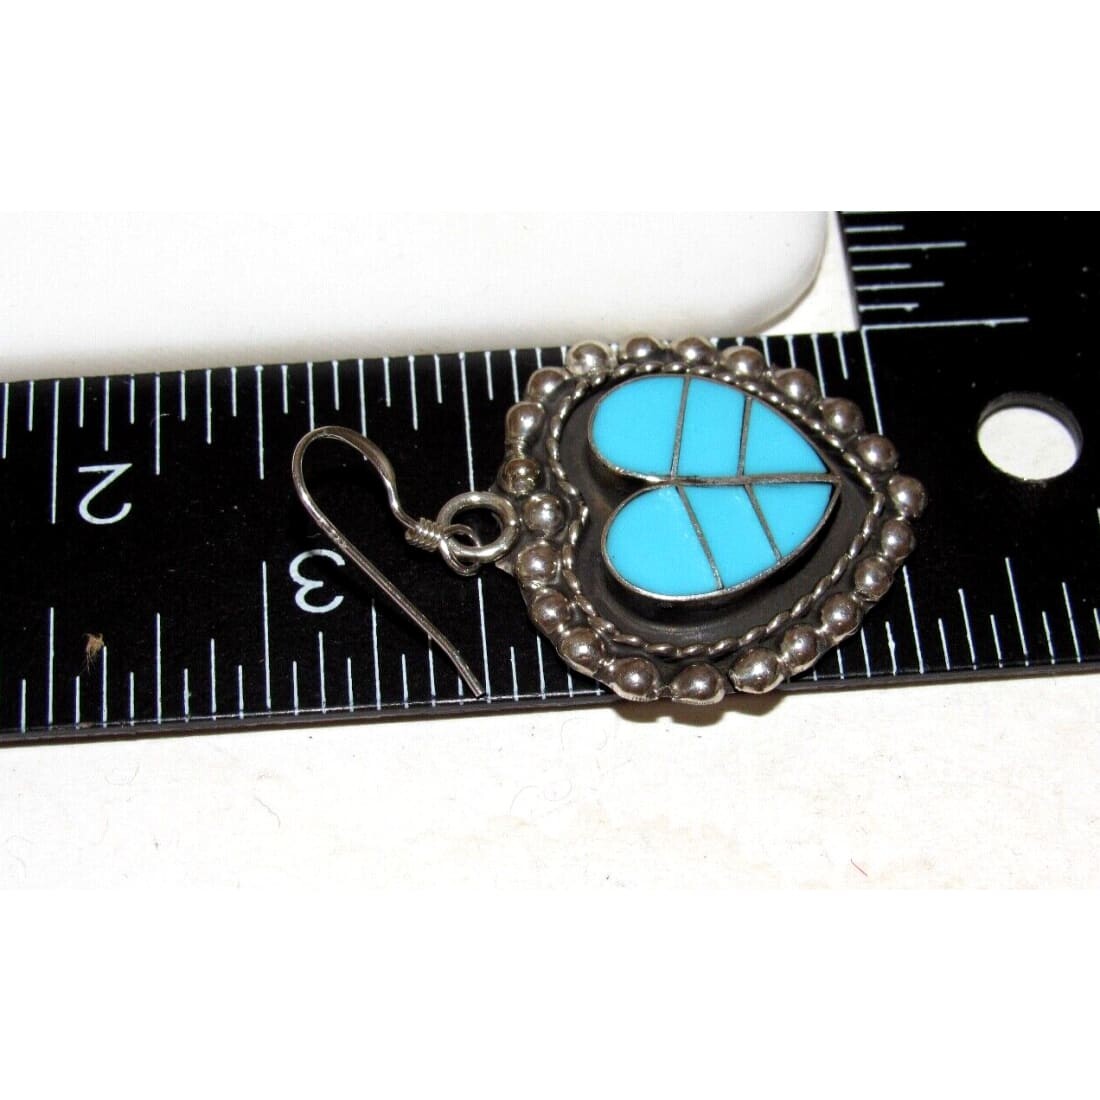 Zuni Turquoise Inlay & Sterling Silver Heart Dangle